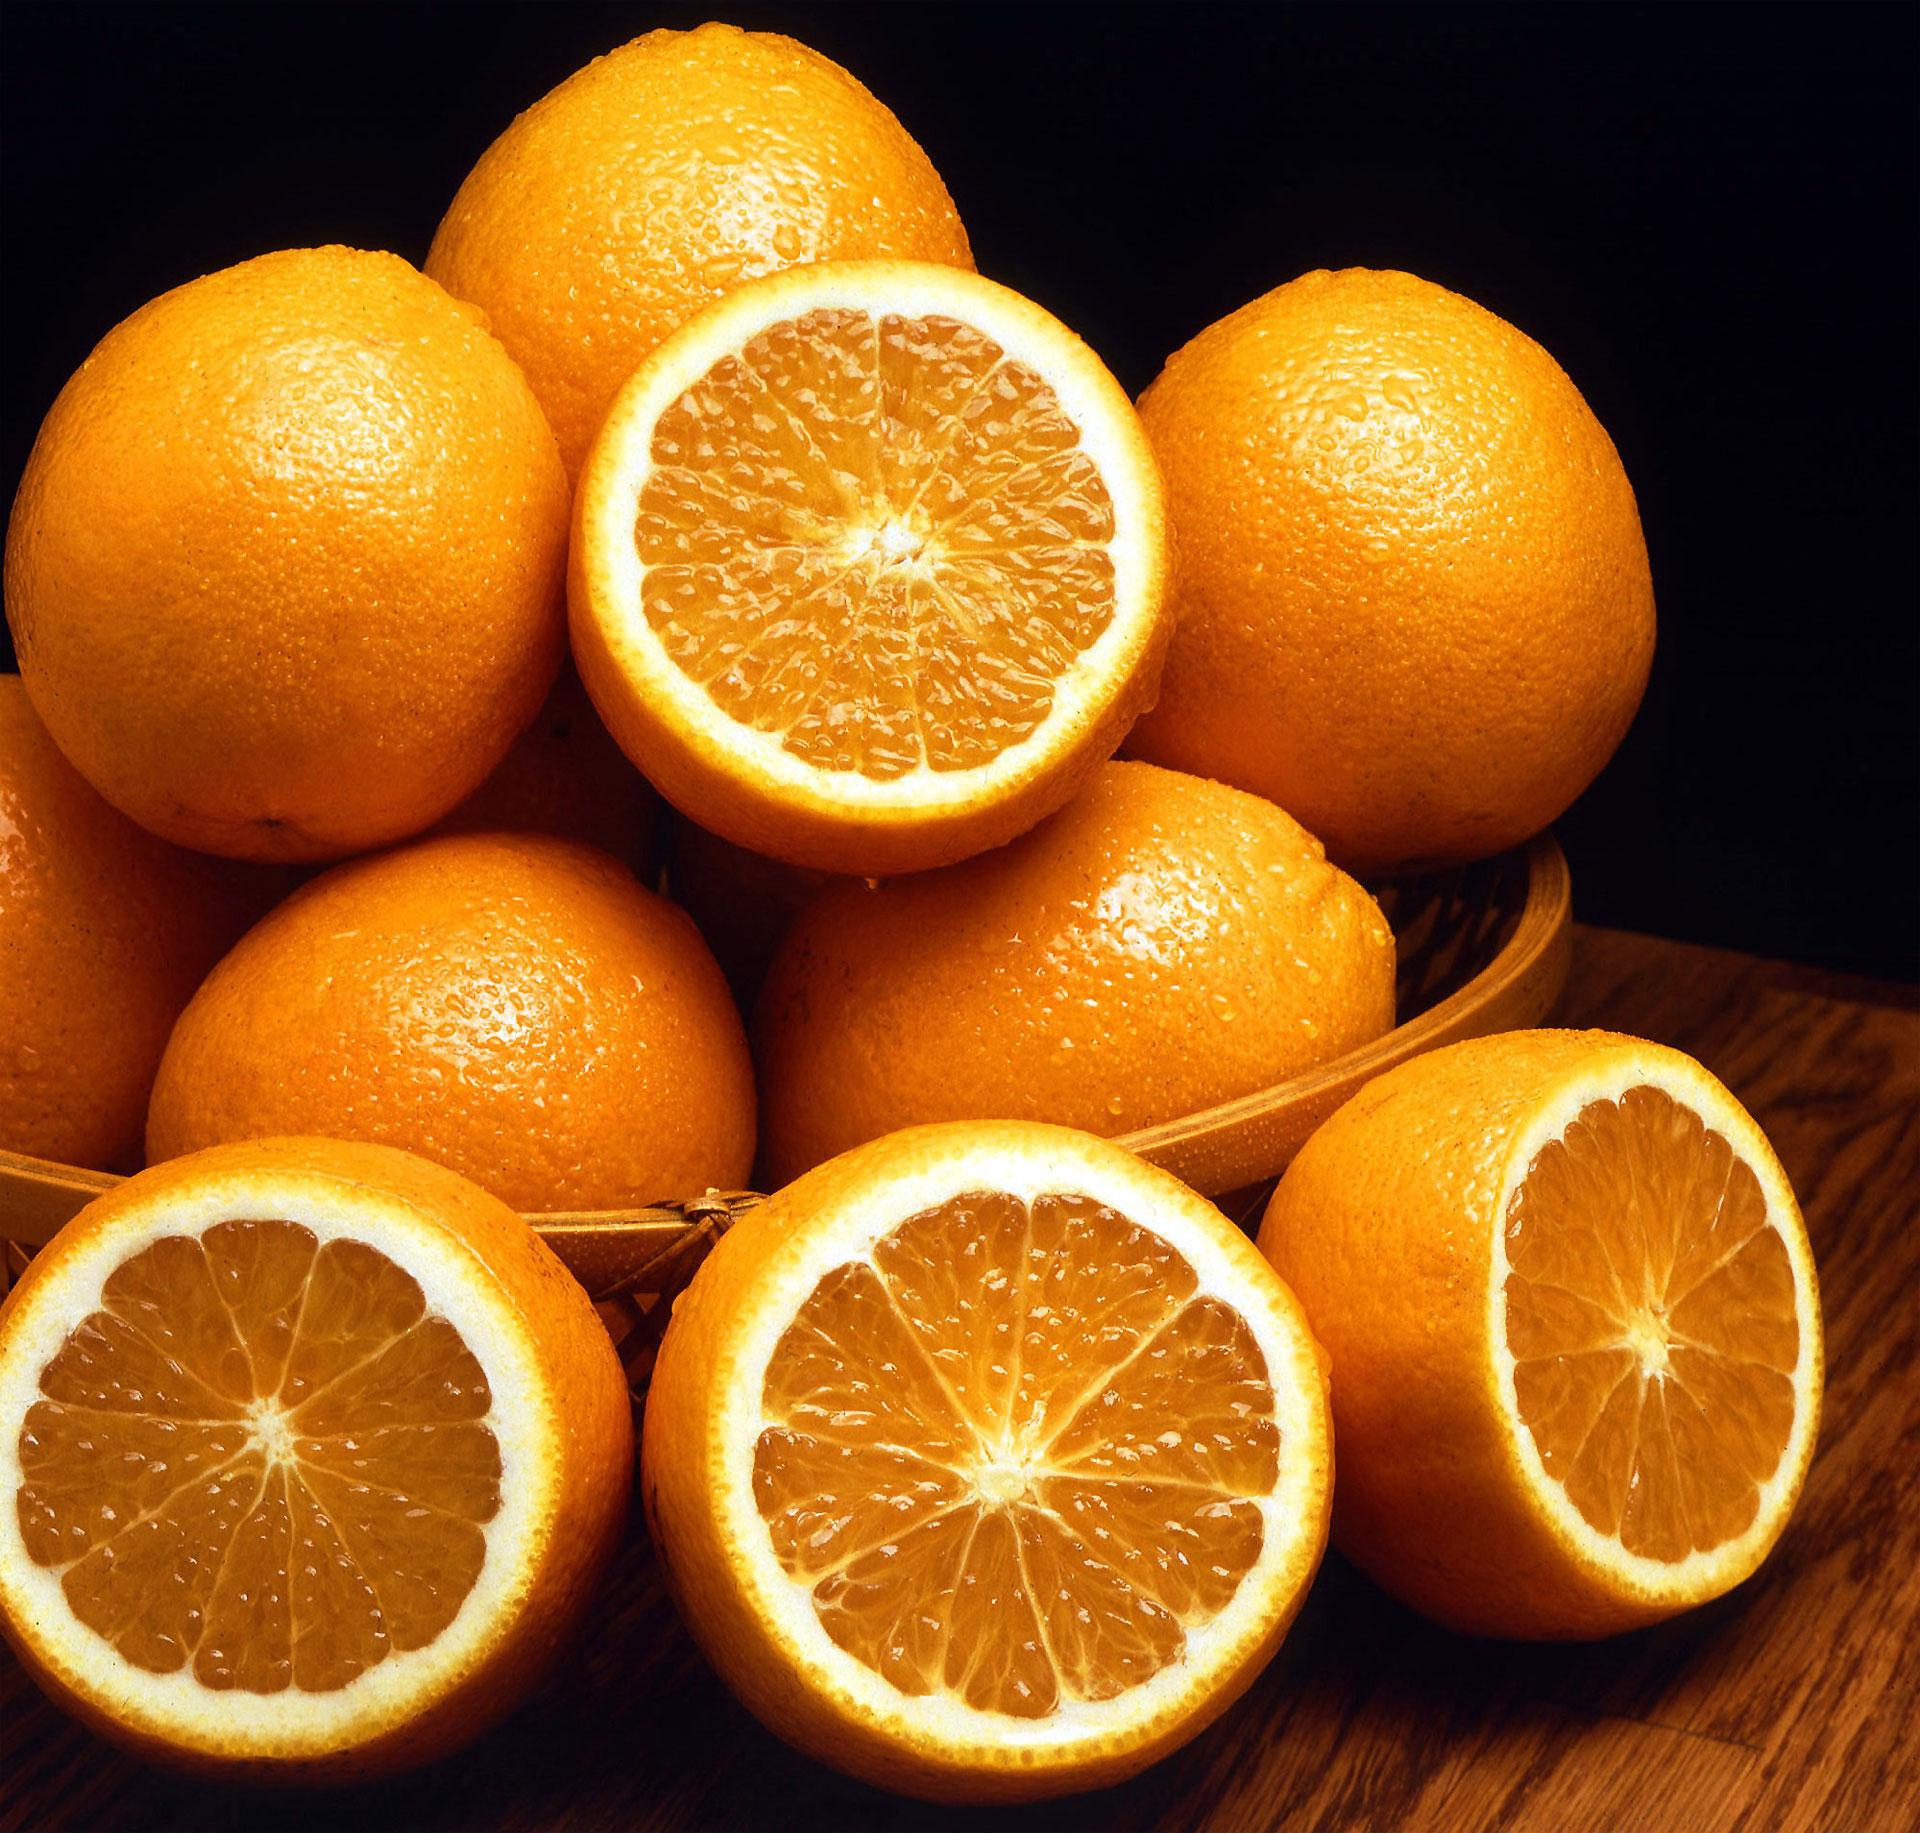 What Exactly Are Cara Cara Oranges?